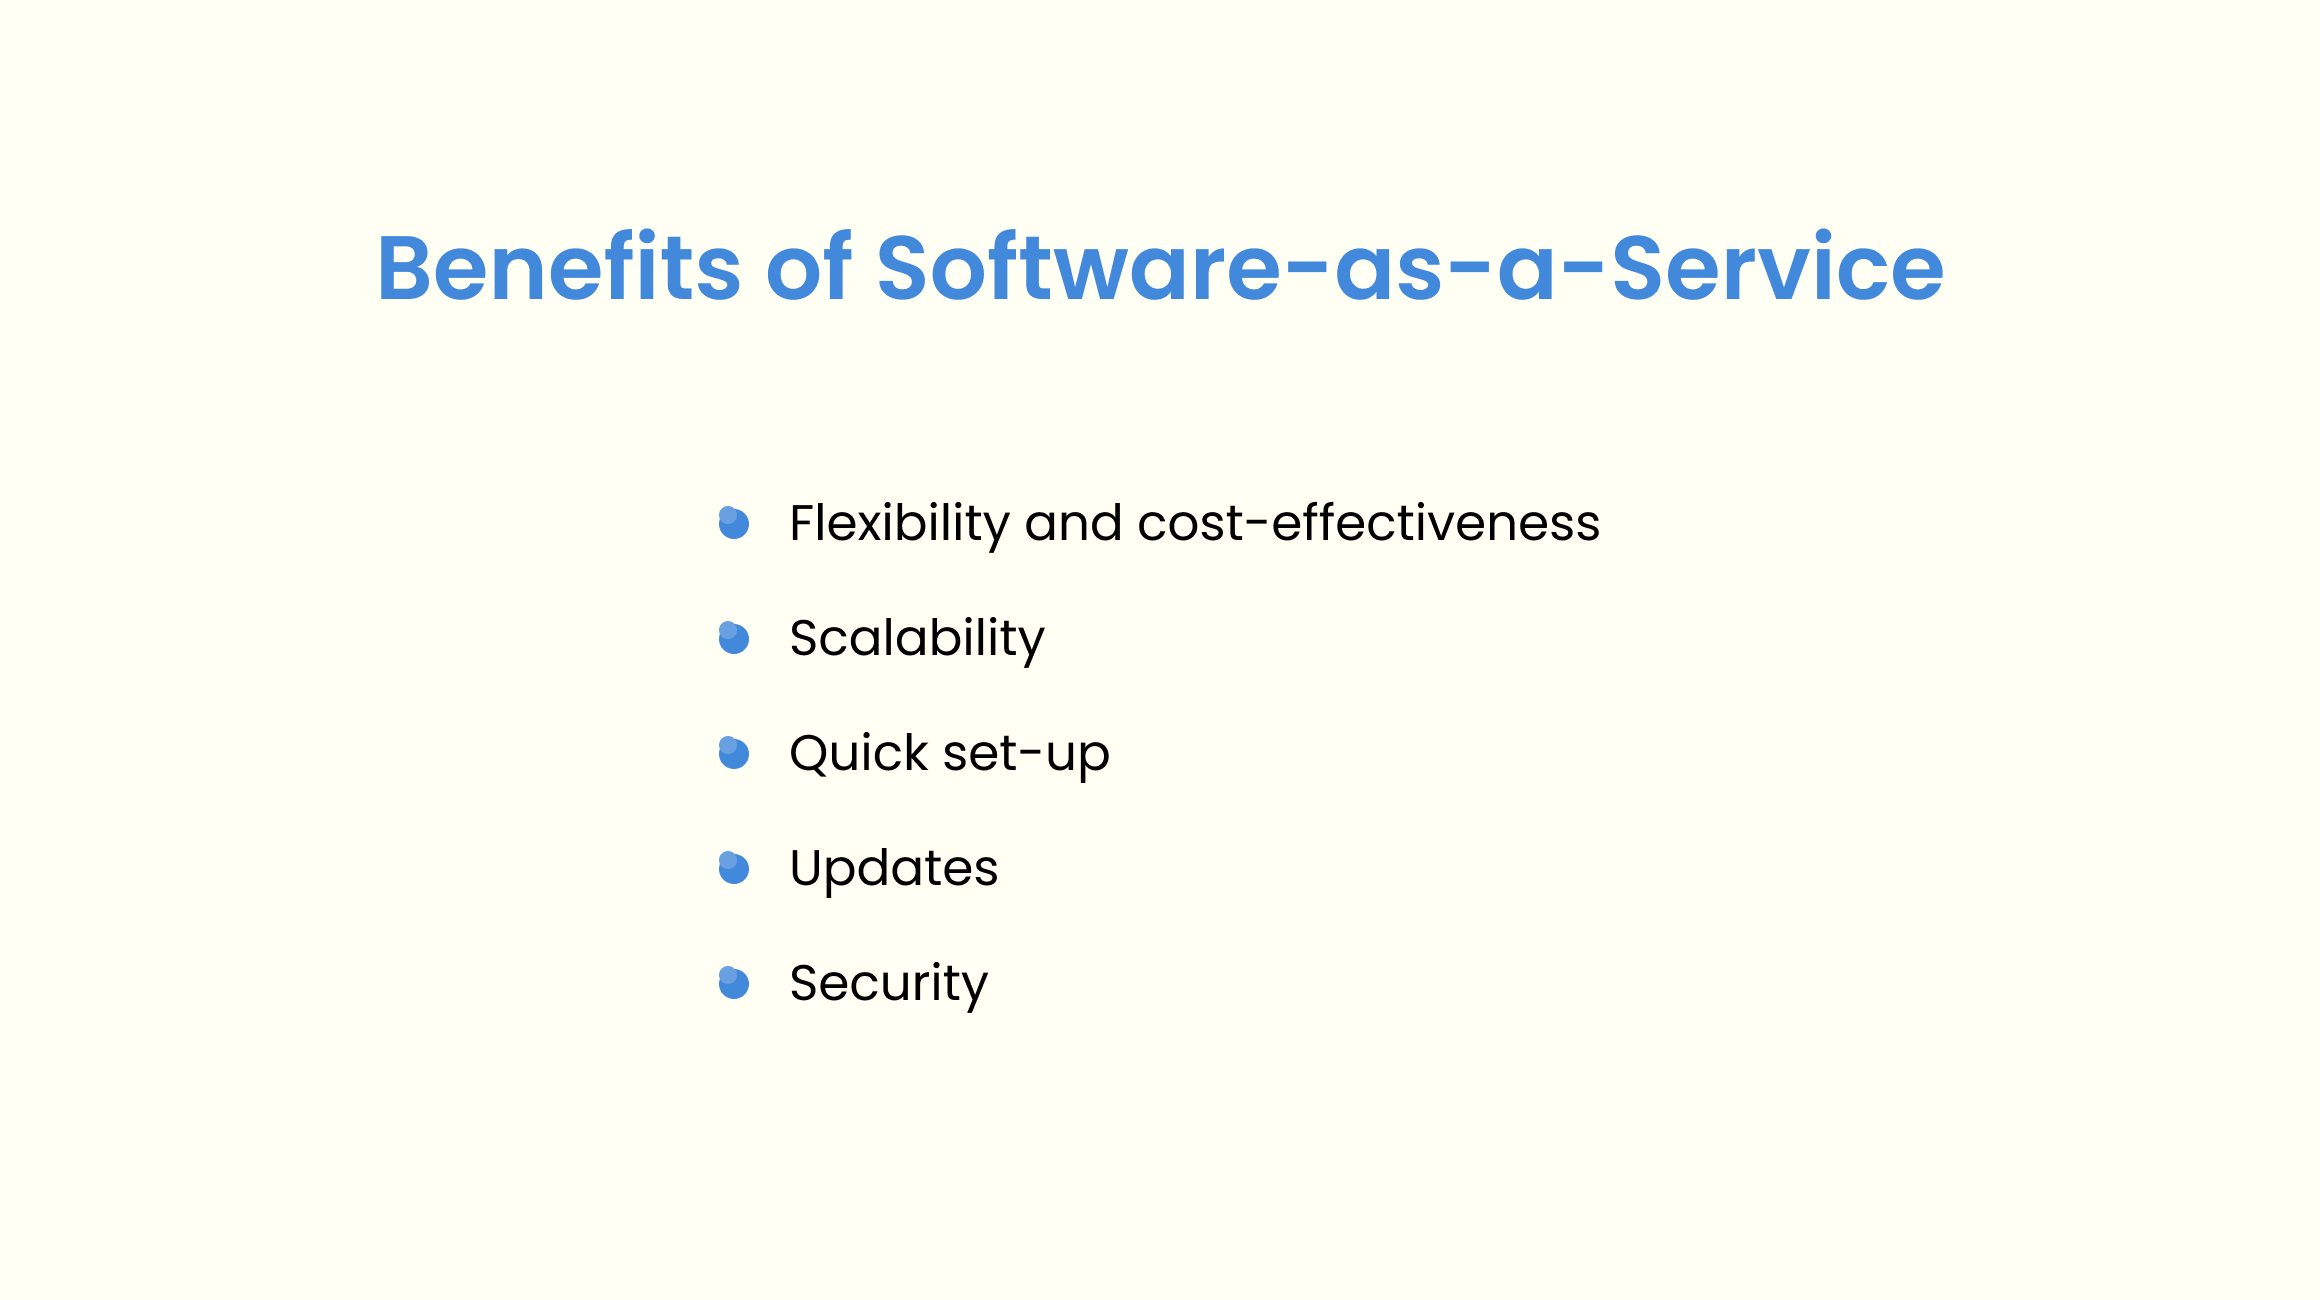 Benefits of Software-as-a-Service